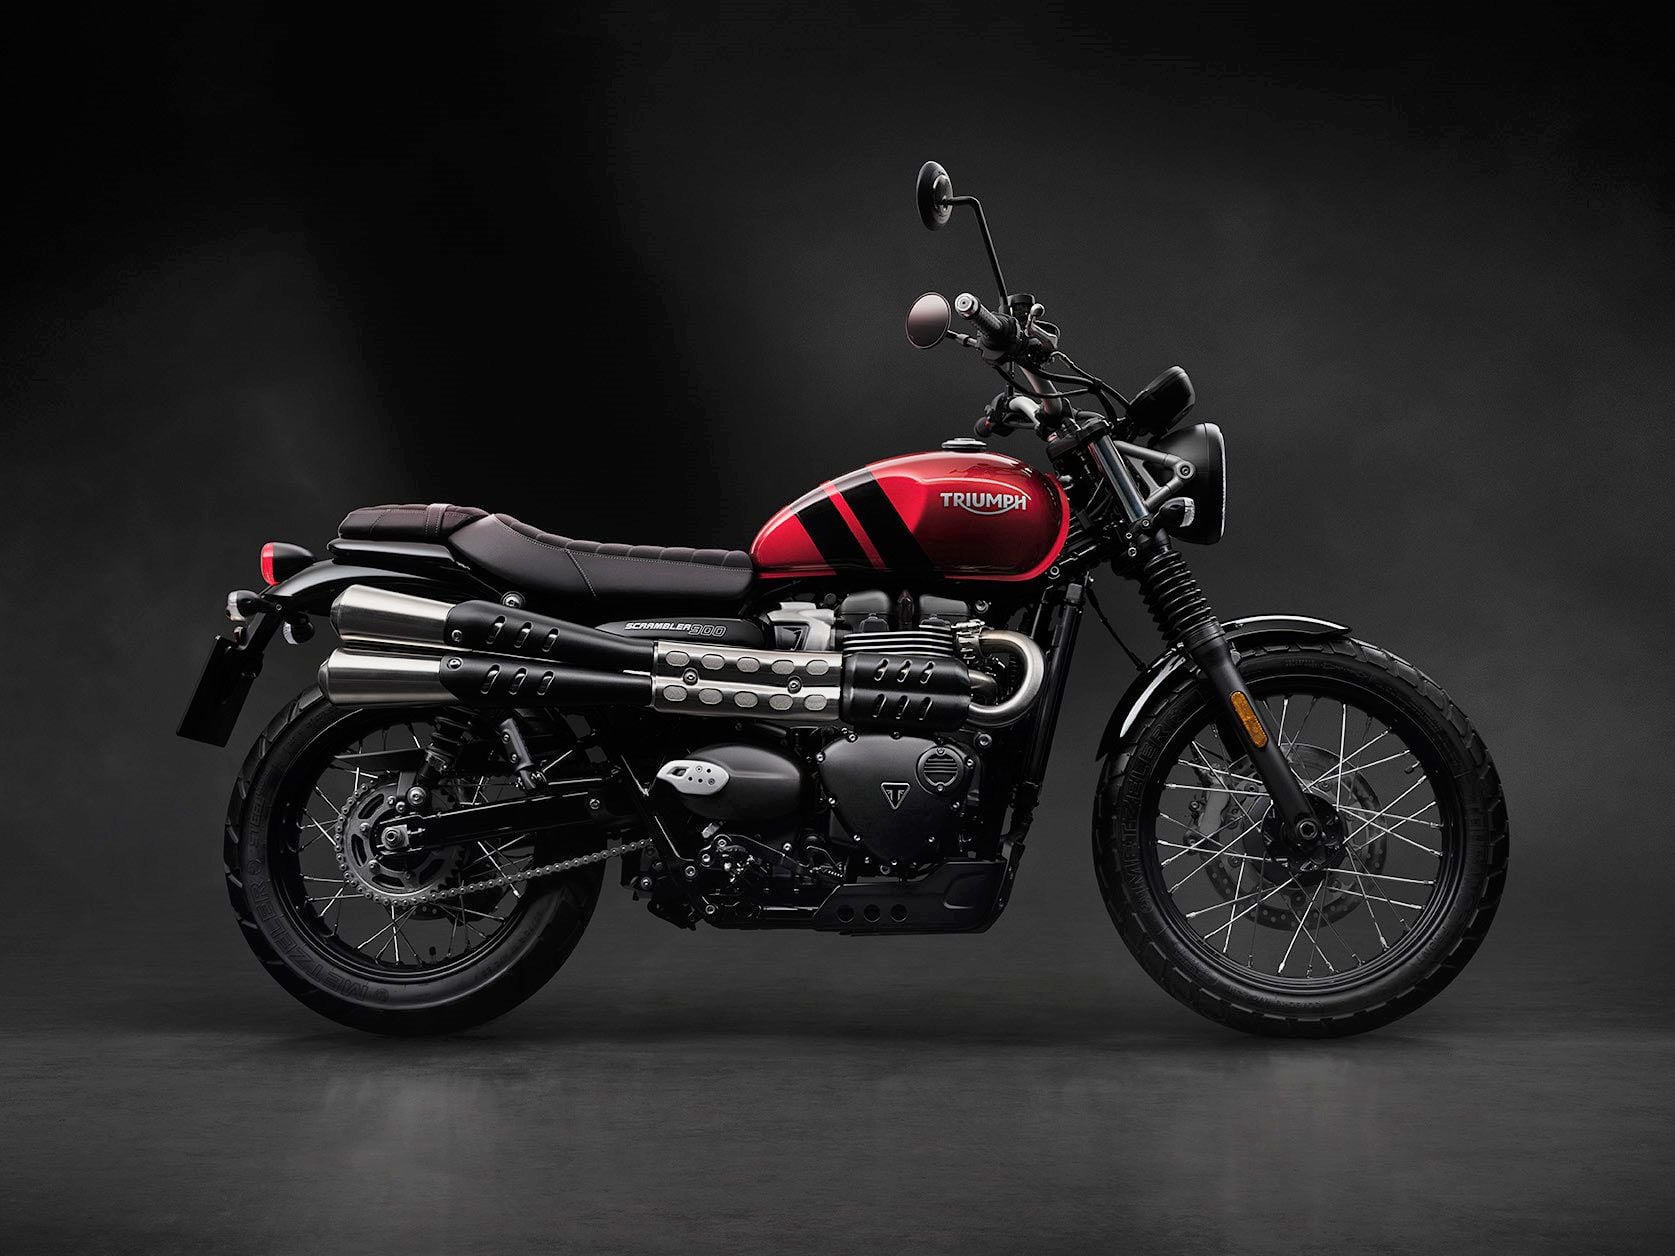 Also not-really-new for 2023 is the Scrambler 900, which we used to call the Street Scrambler back in 2022.